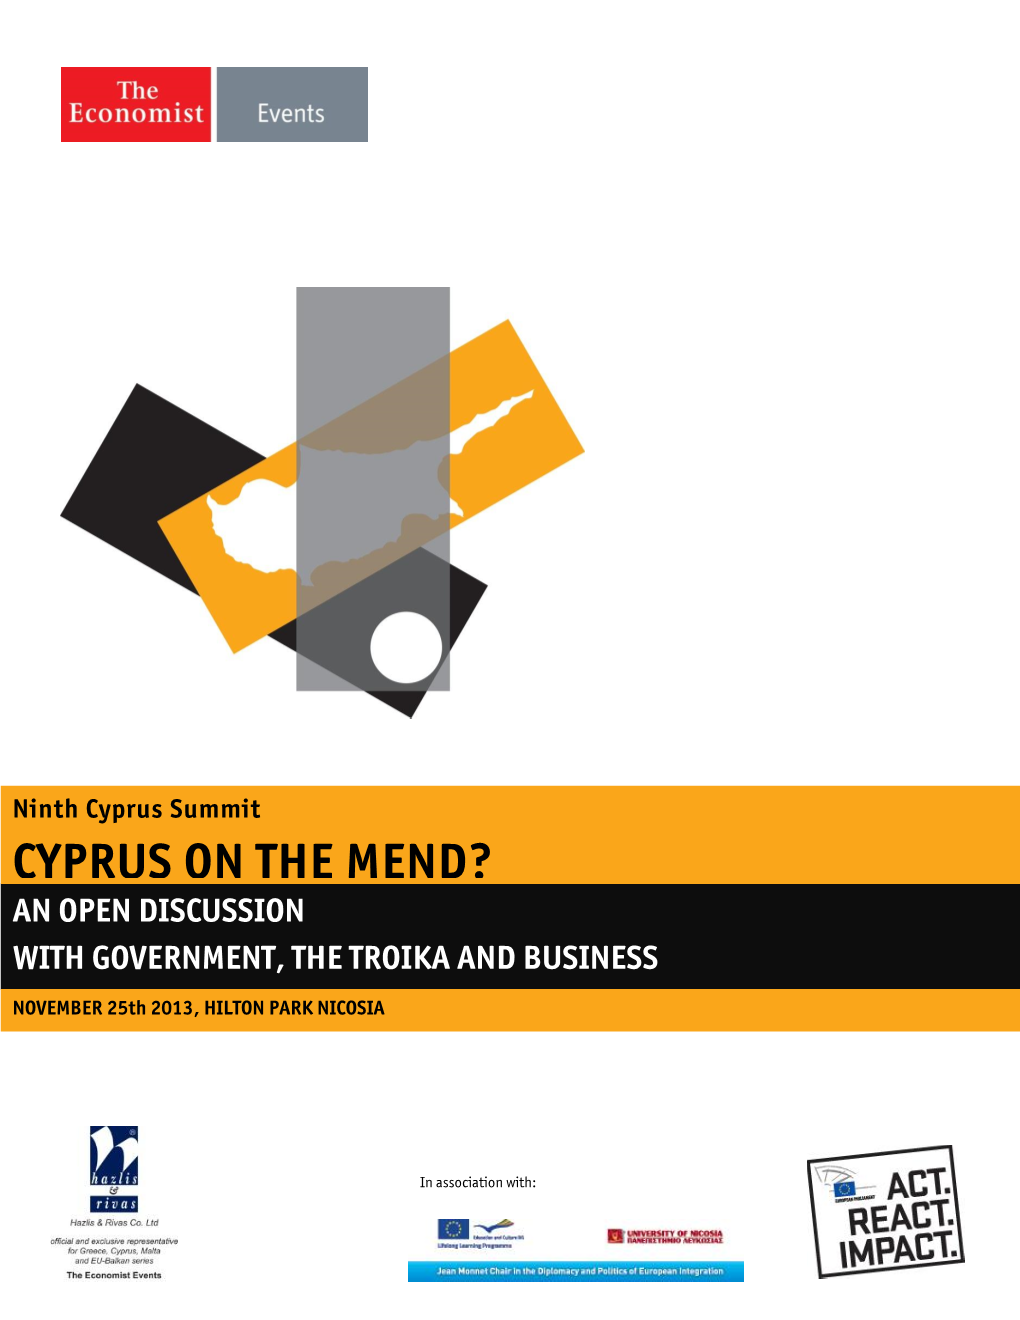 Cyprus on the Mend? an Open Discussion